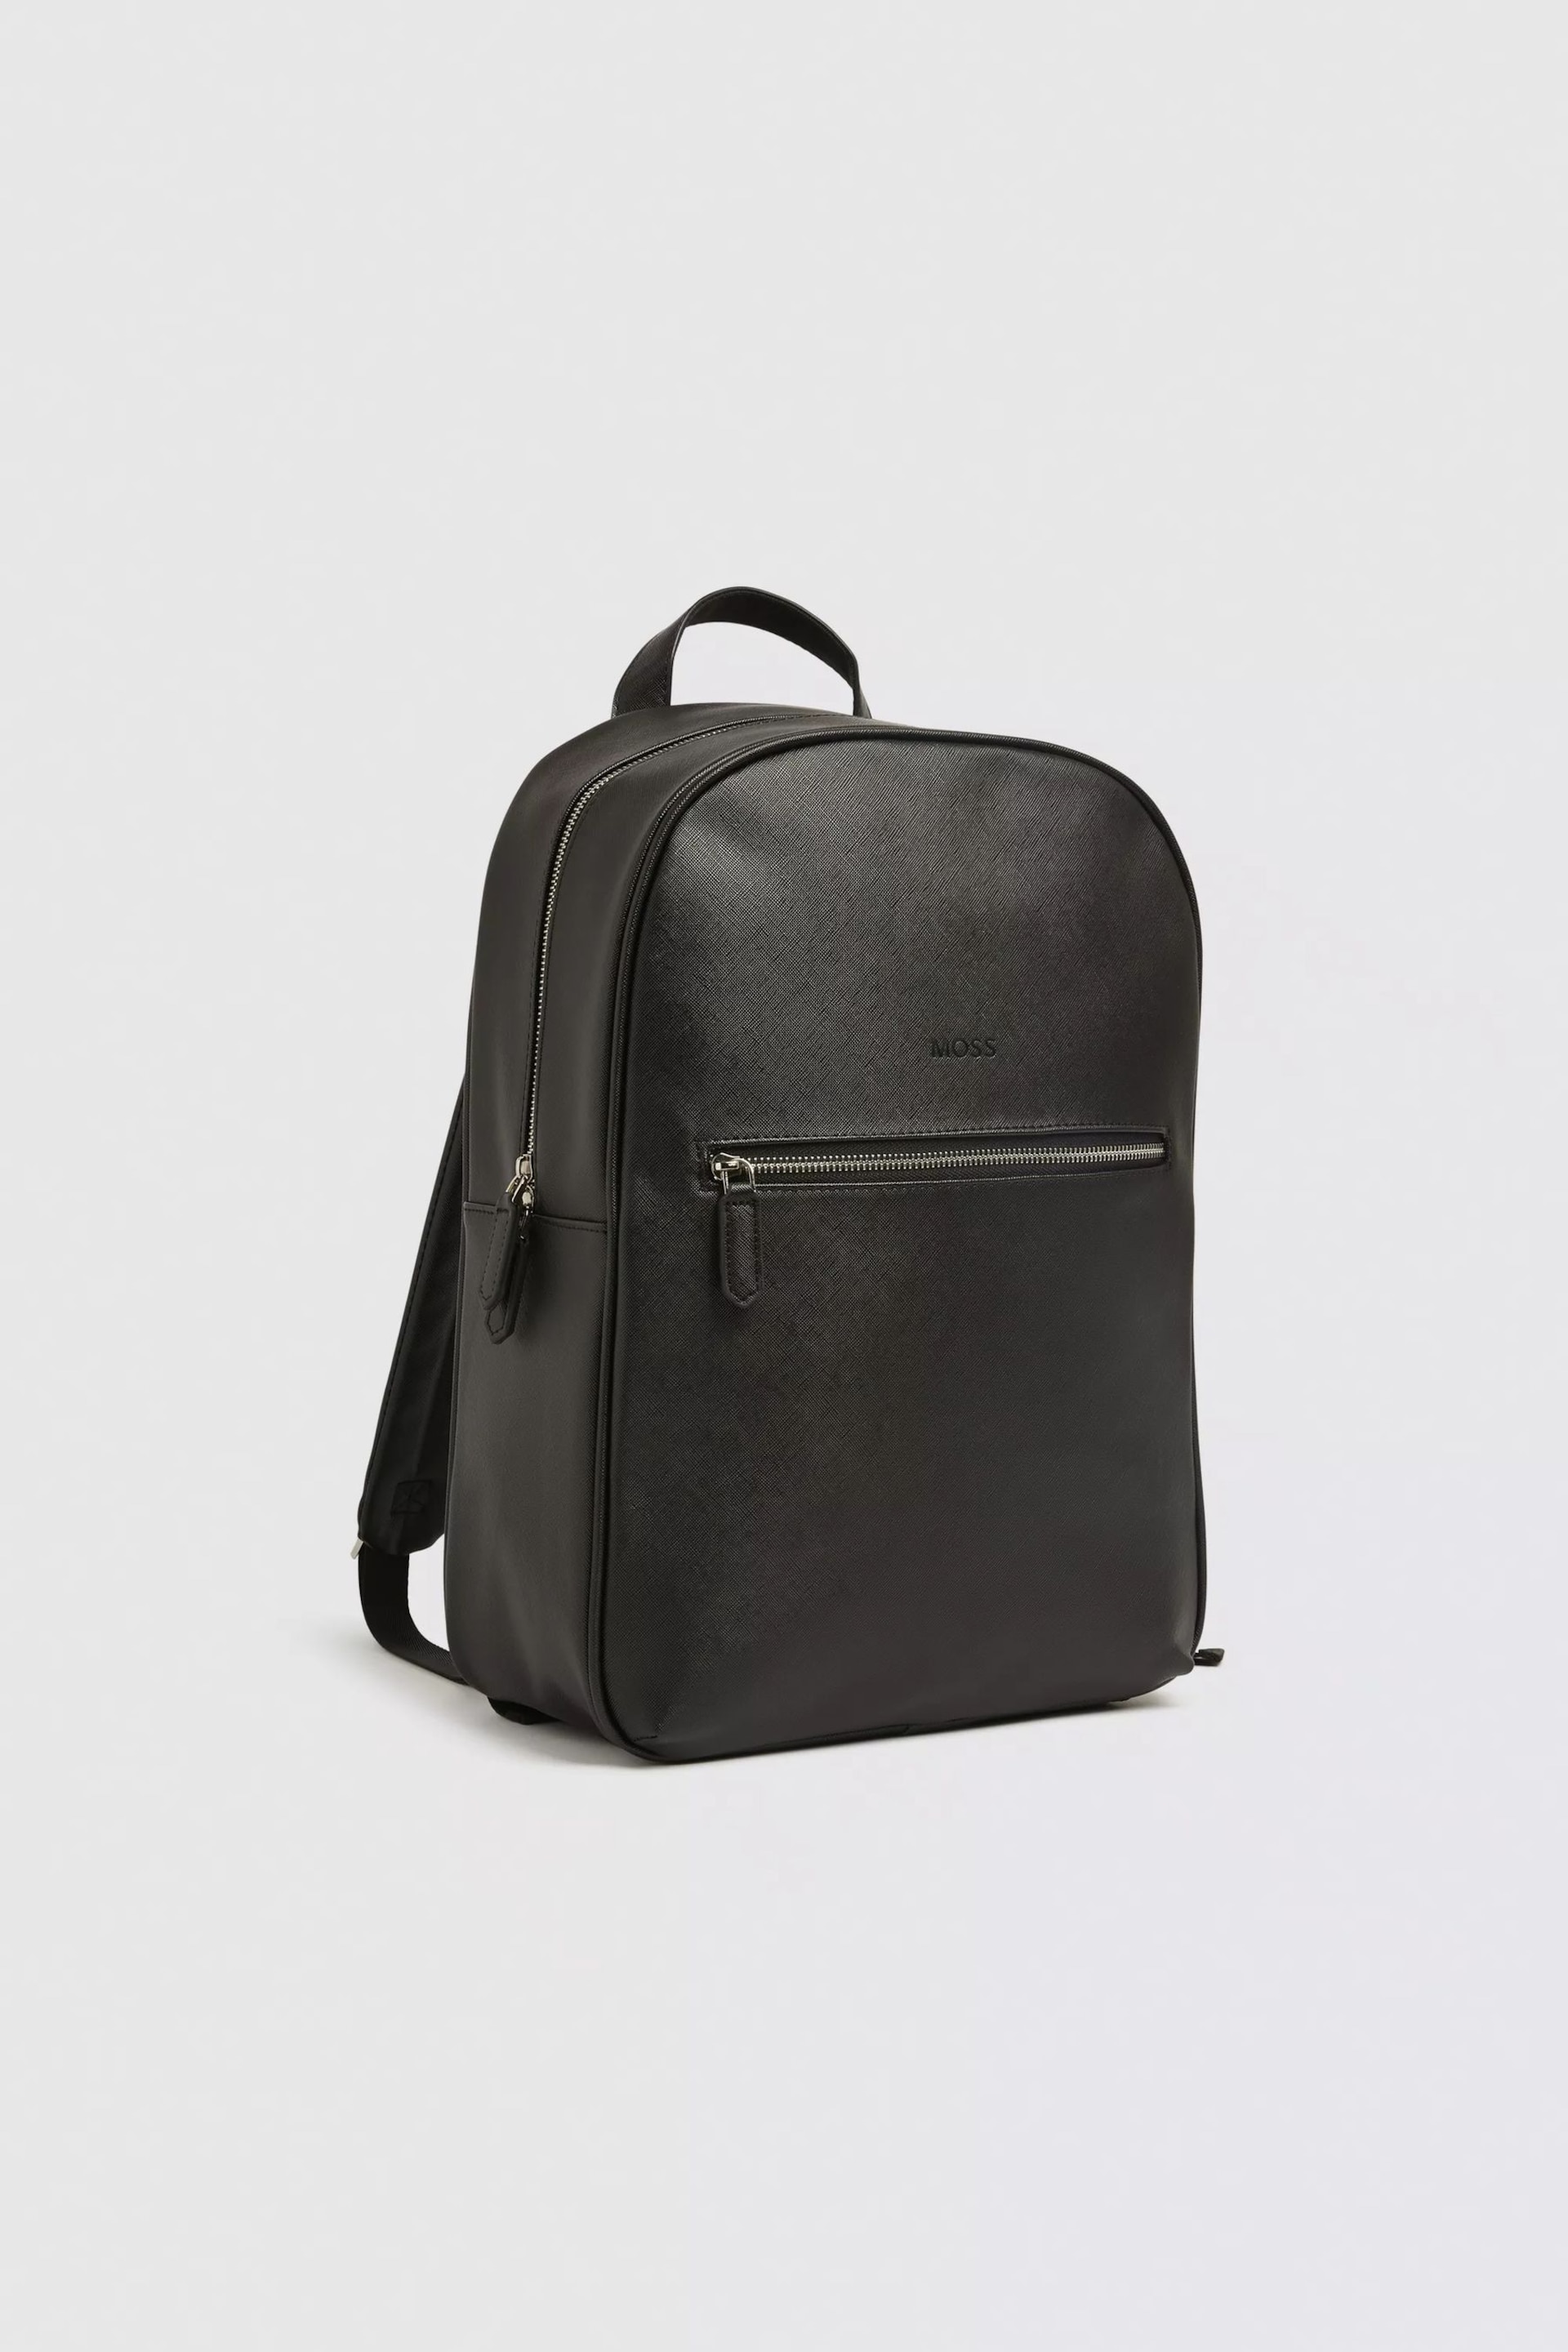 MOSS Saffiano Black Backpack - Image 2 of 4